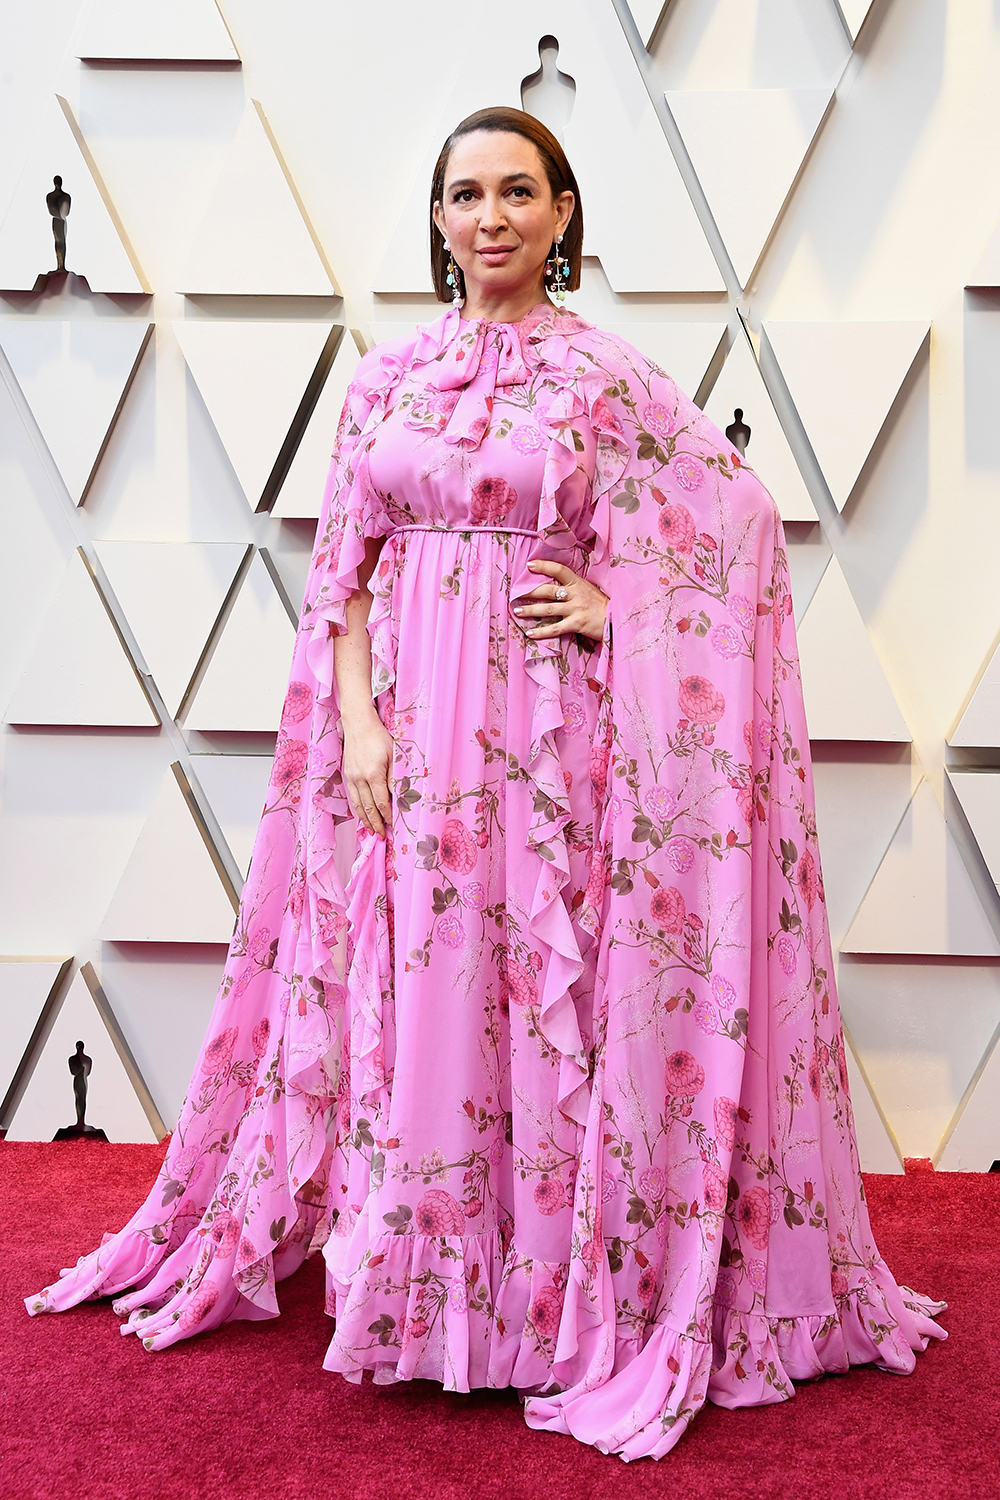 HOLLYWOOD, CA - FEBRUARY 24: Maya Rudolph attends the 91st Annual Academy Awards at Hollywood and Highland on February 24, 2019 in Hollywood, California. (Photo by Steve Granitz/WireImage)